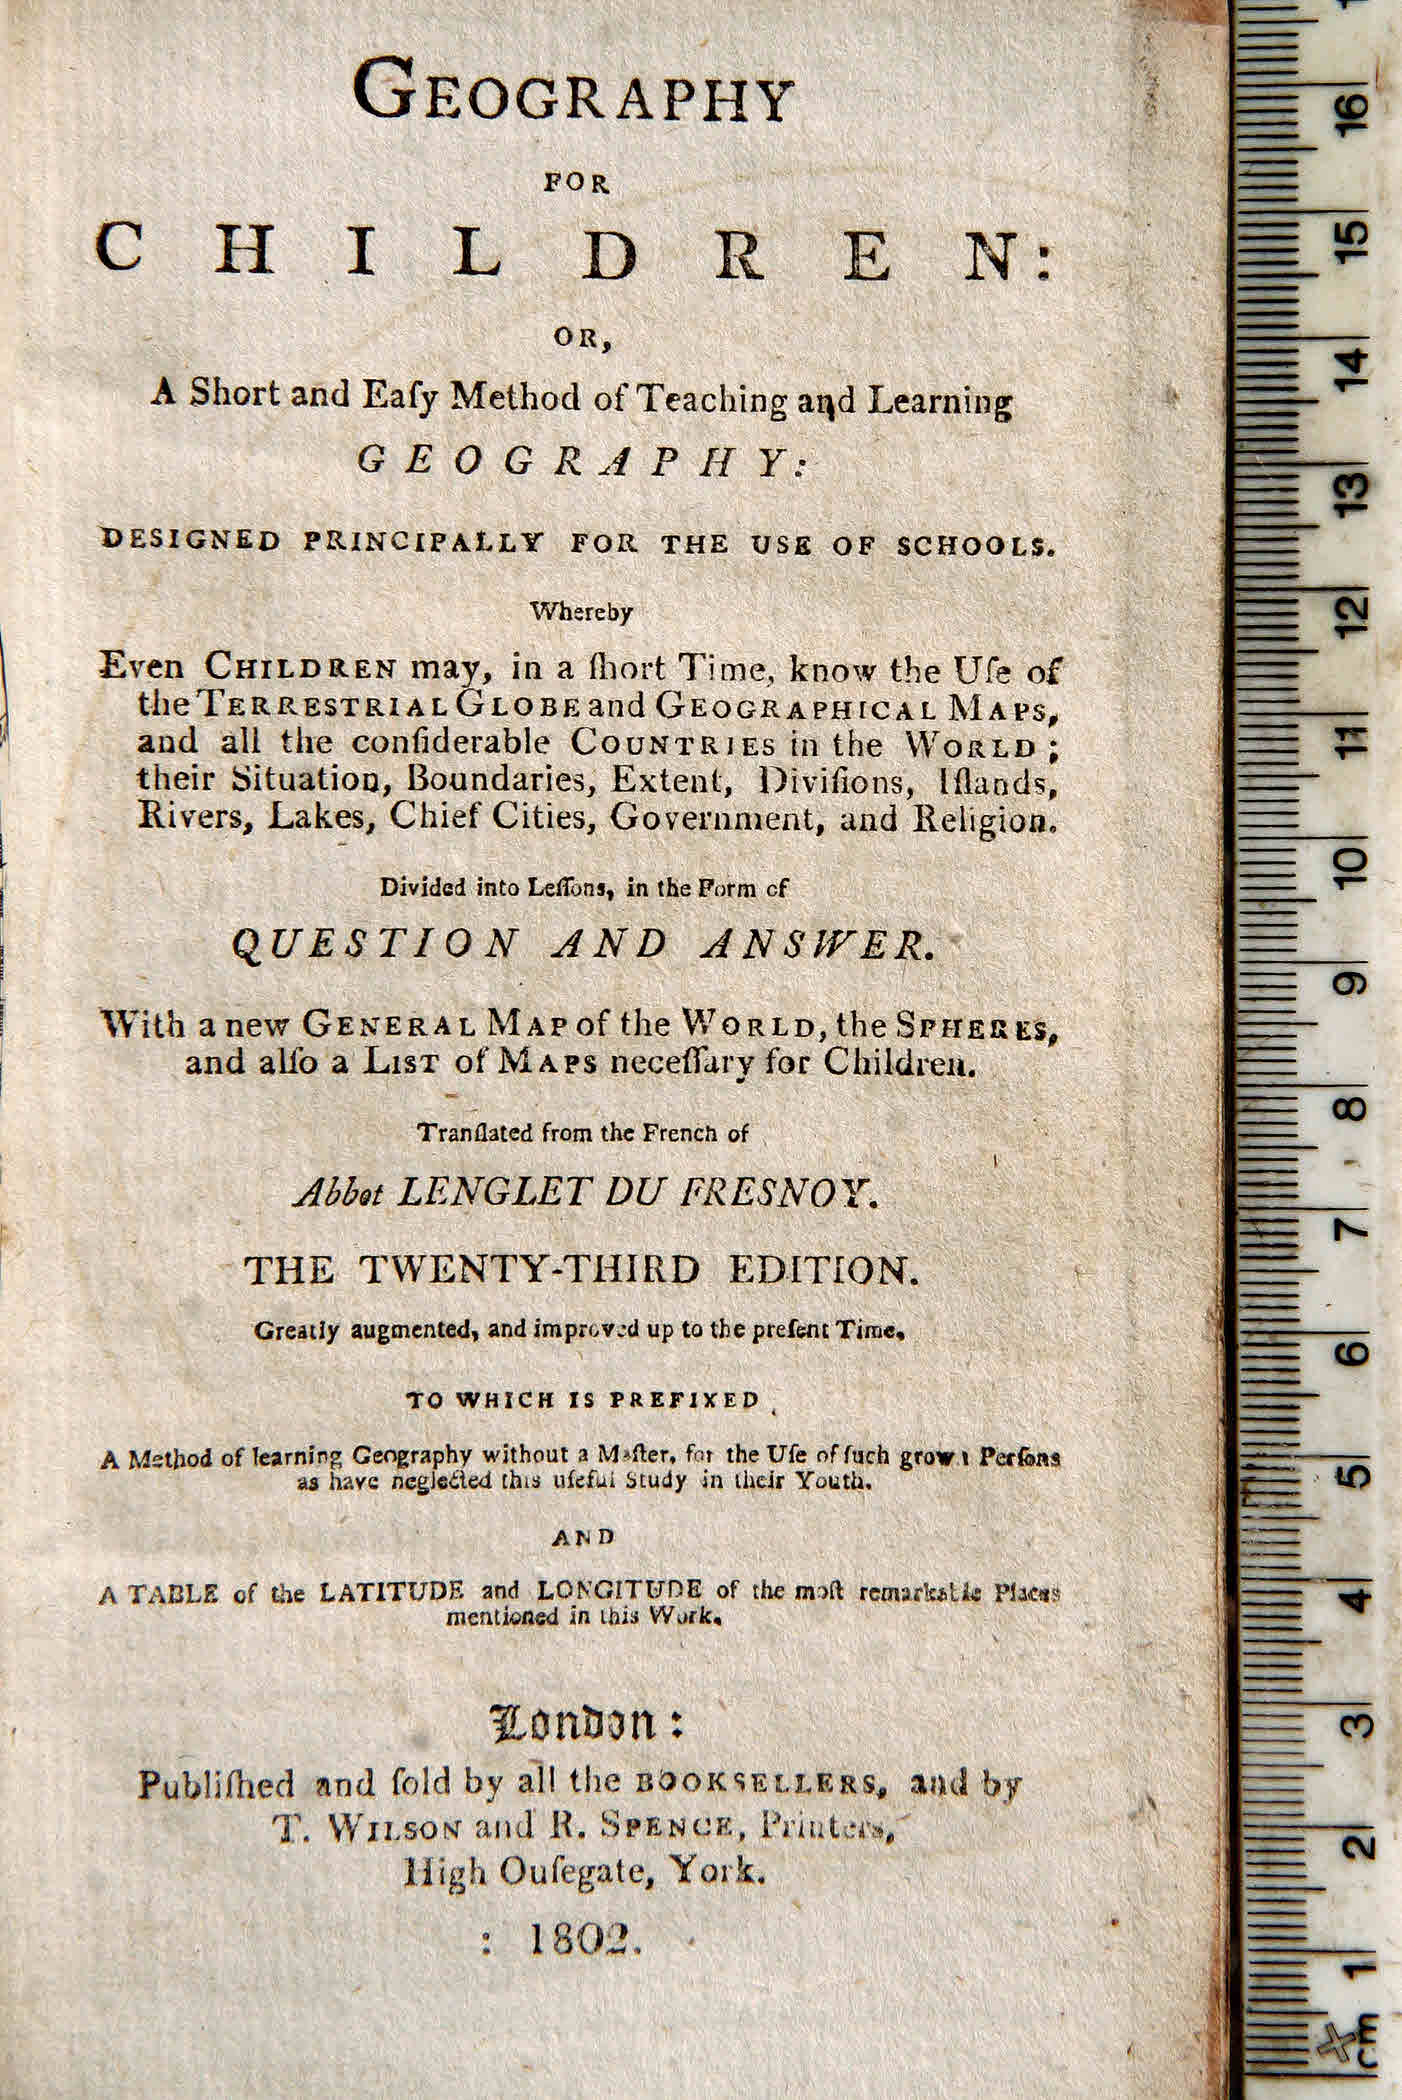 Title Page, 1802 Geography for Children